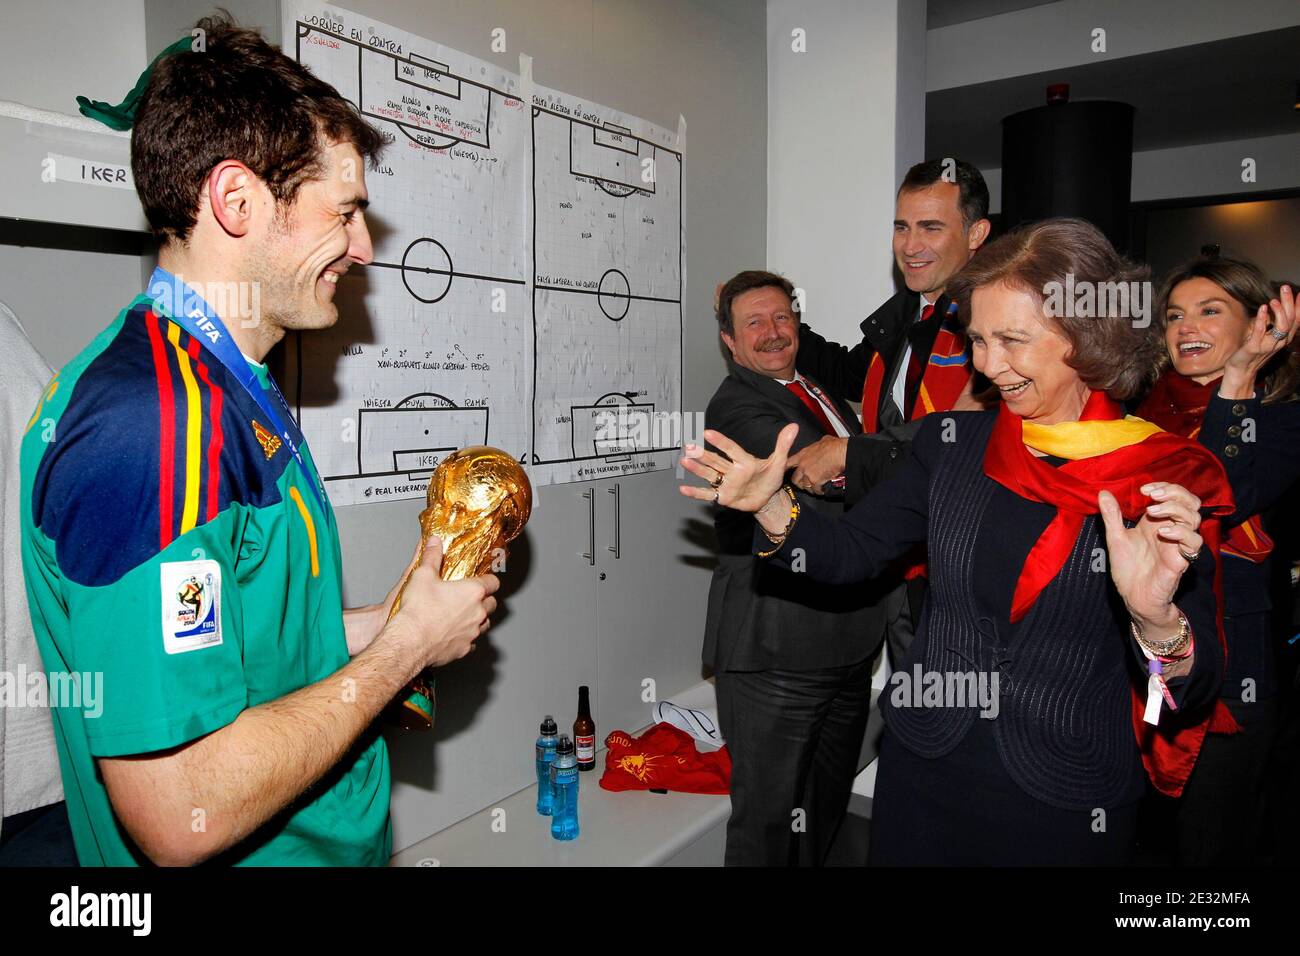 Spainish Goalkeeper Iker Casillas, Queen Sofia, Crown Prince Felipe and Crown Princess Letizia celebrates the victory in the Spanish dressing room after Spanish football tam won the 2010 FIFA World Cup at Soccer City Stadium in Johannesburg, South Africa, on July 11, 2010. Photo by Pool/Almagro/ABACAPRESS.COM Stock Photo